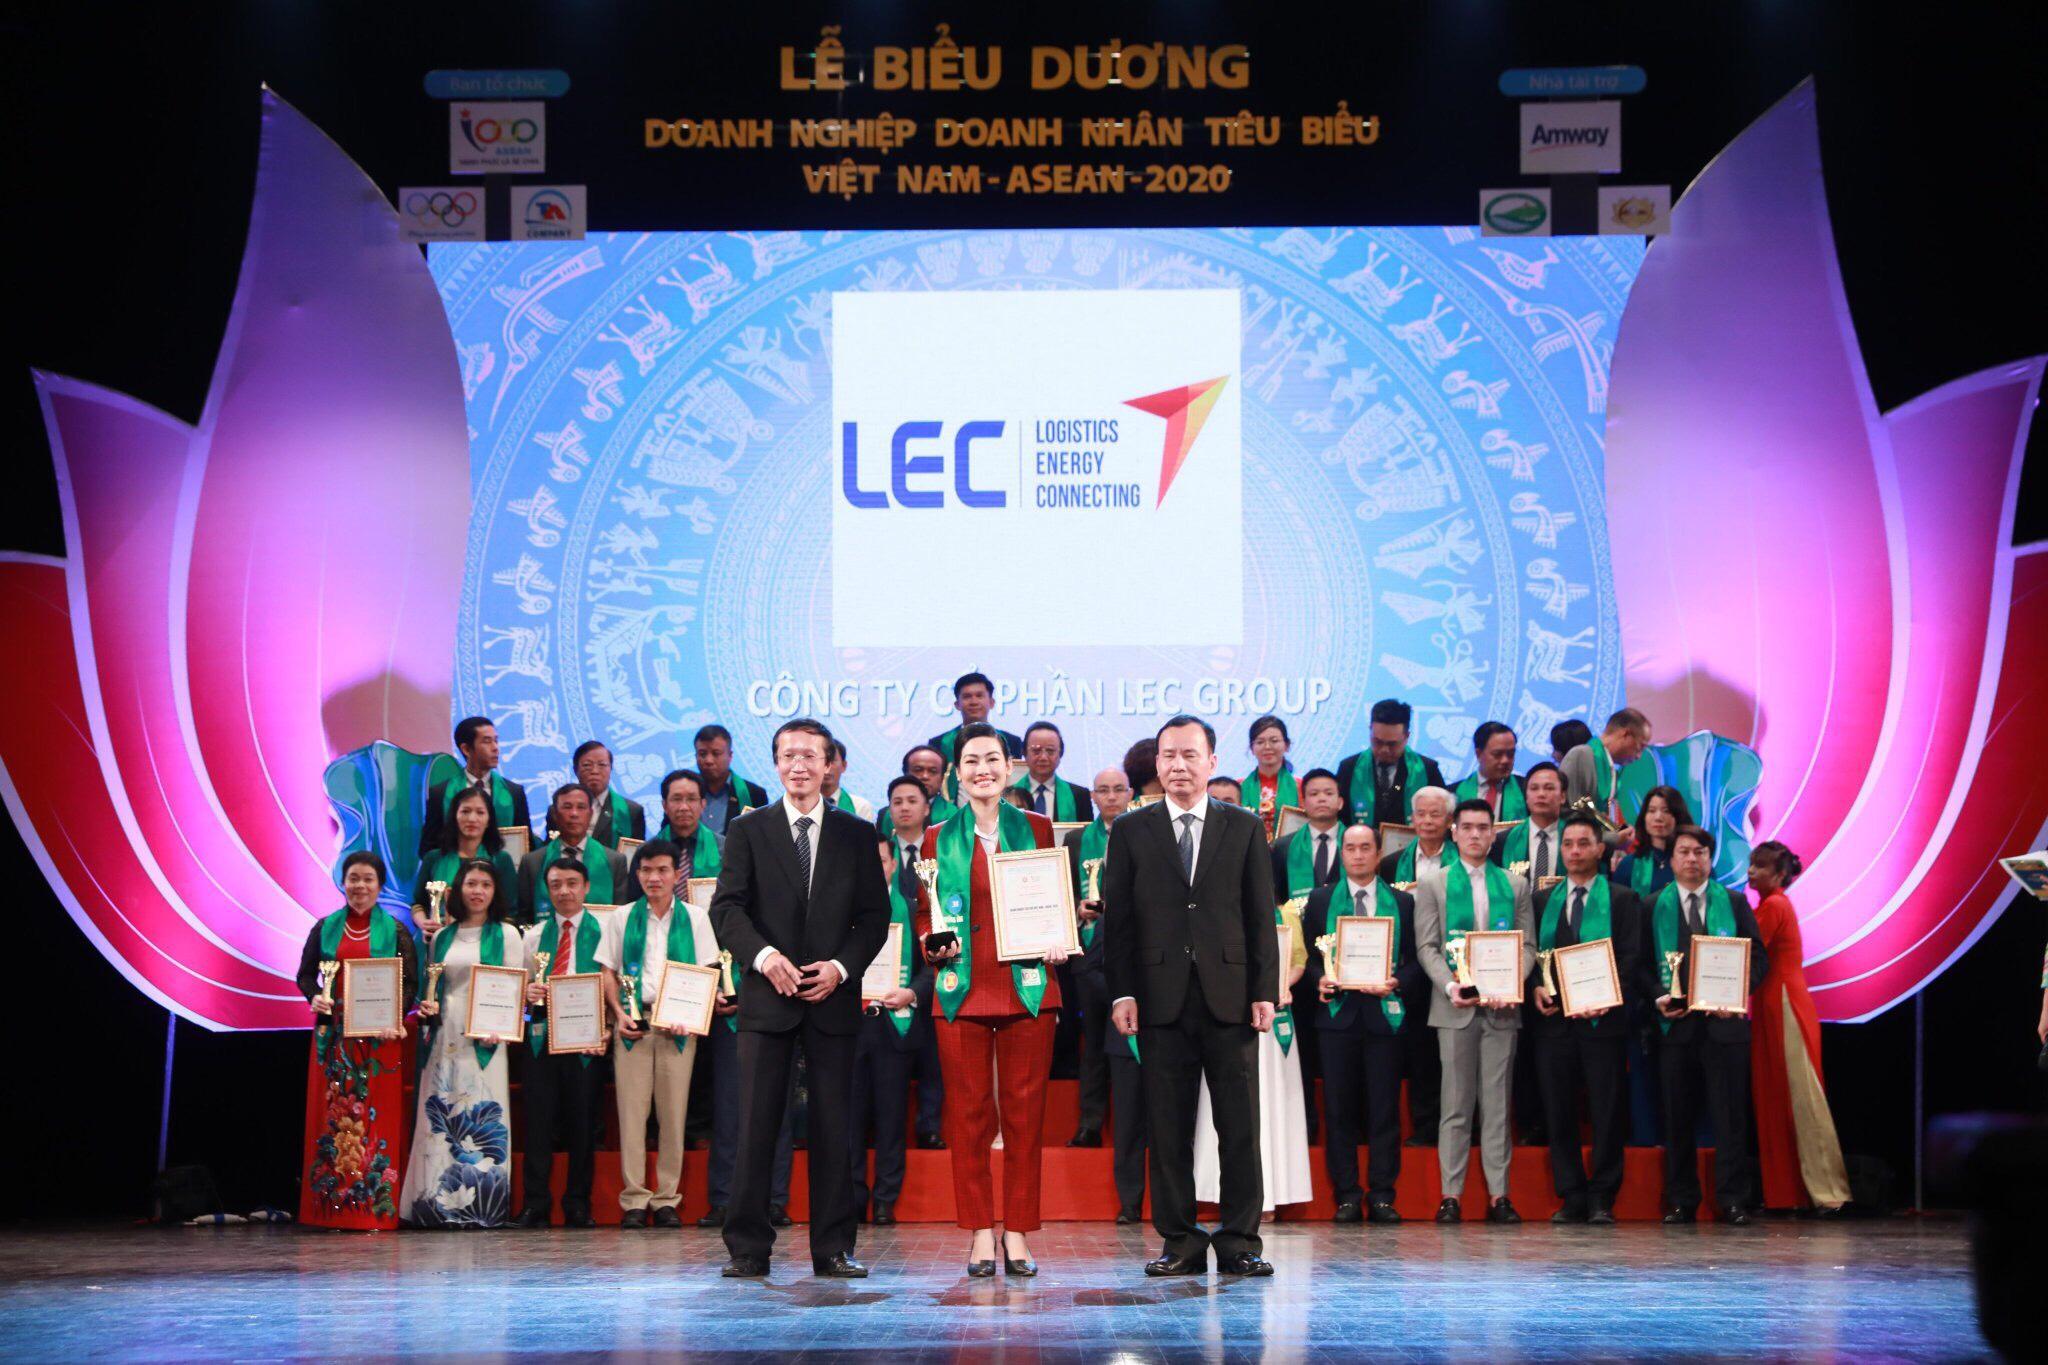 LEC GROUP won the title of typical enterprise of ASEAN 2020